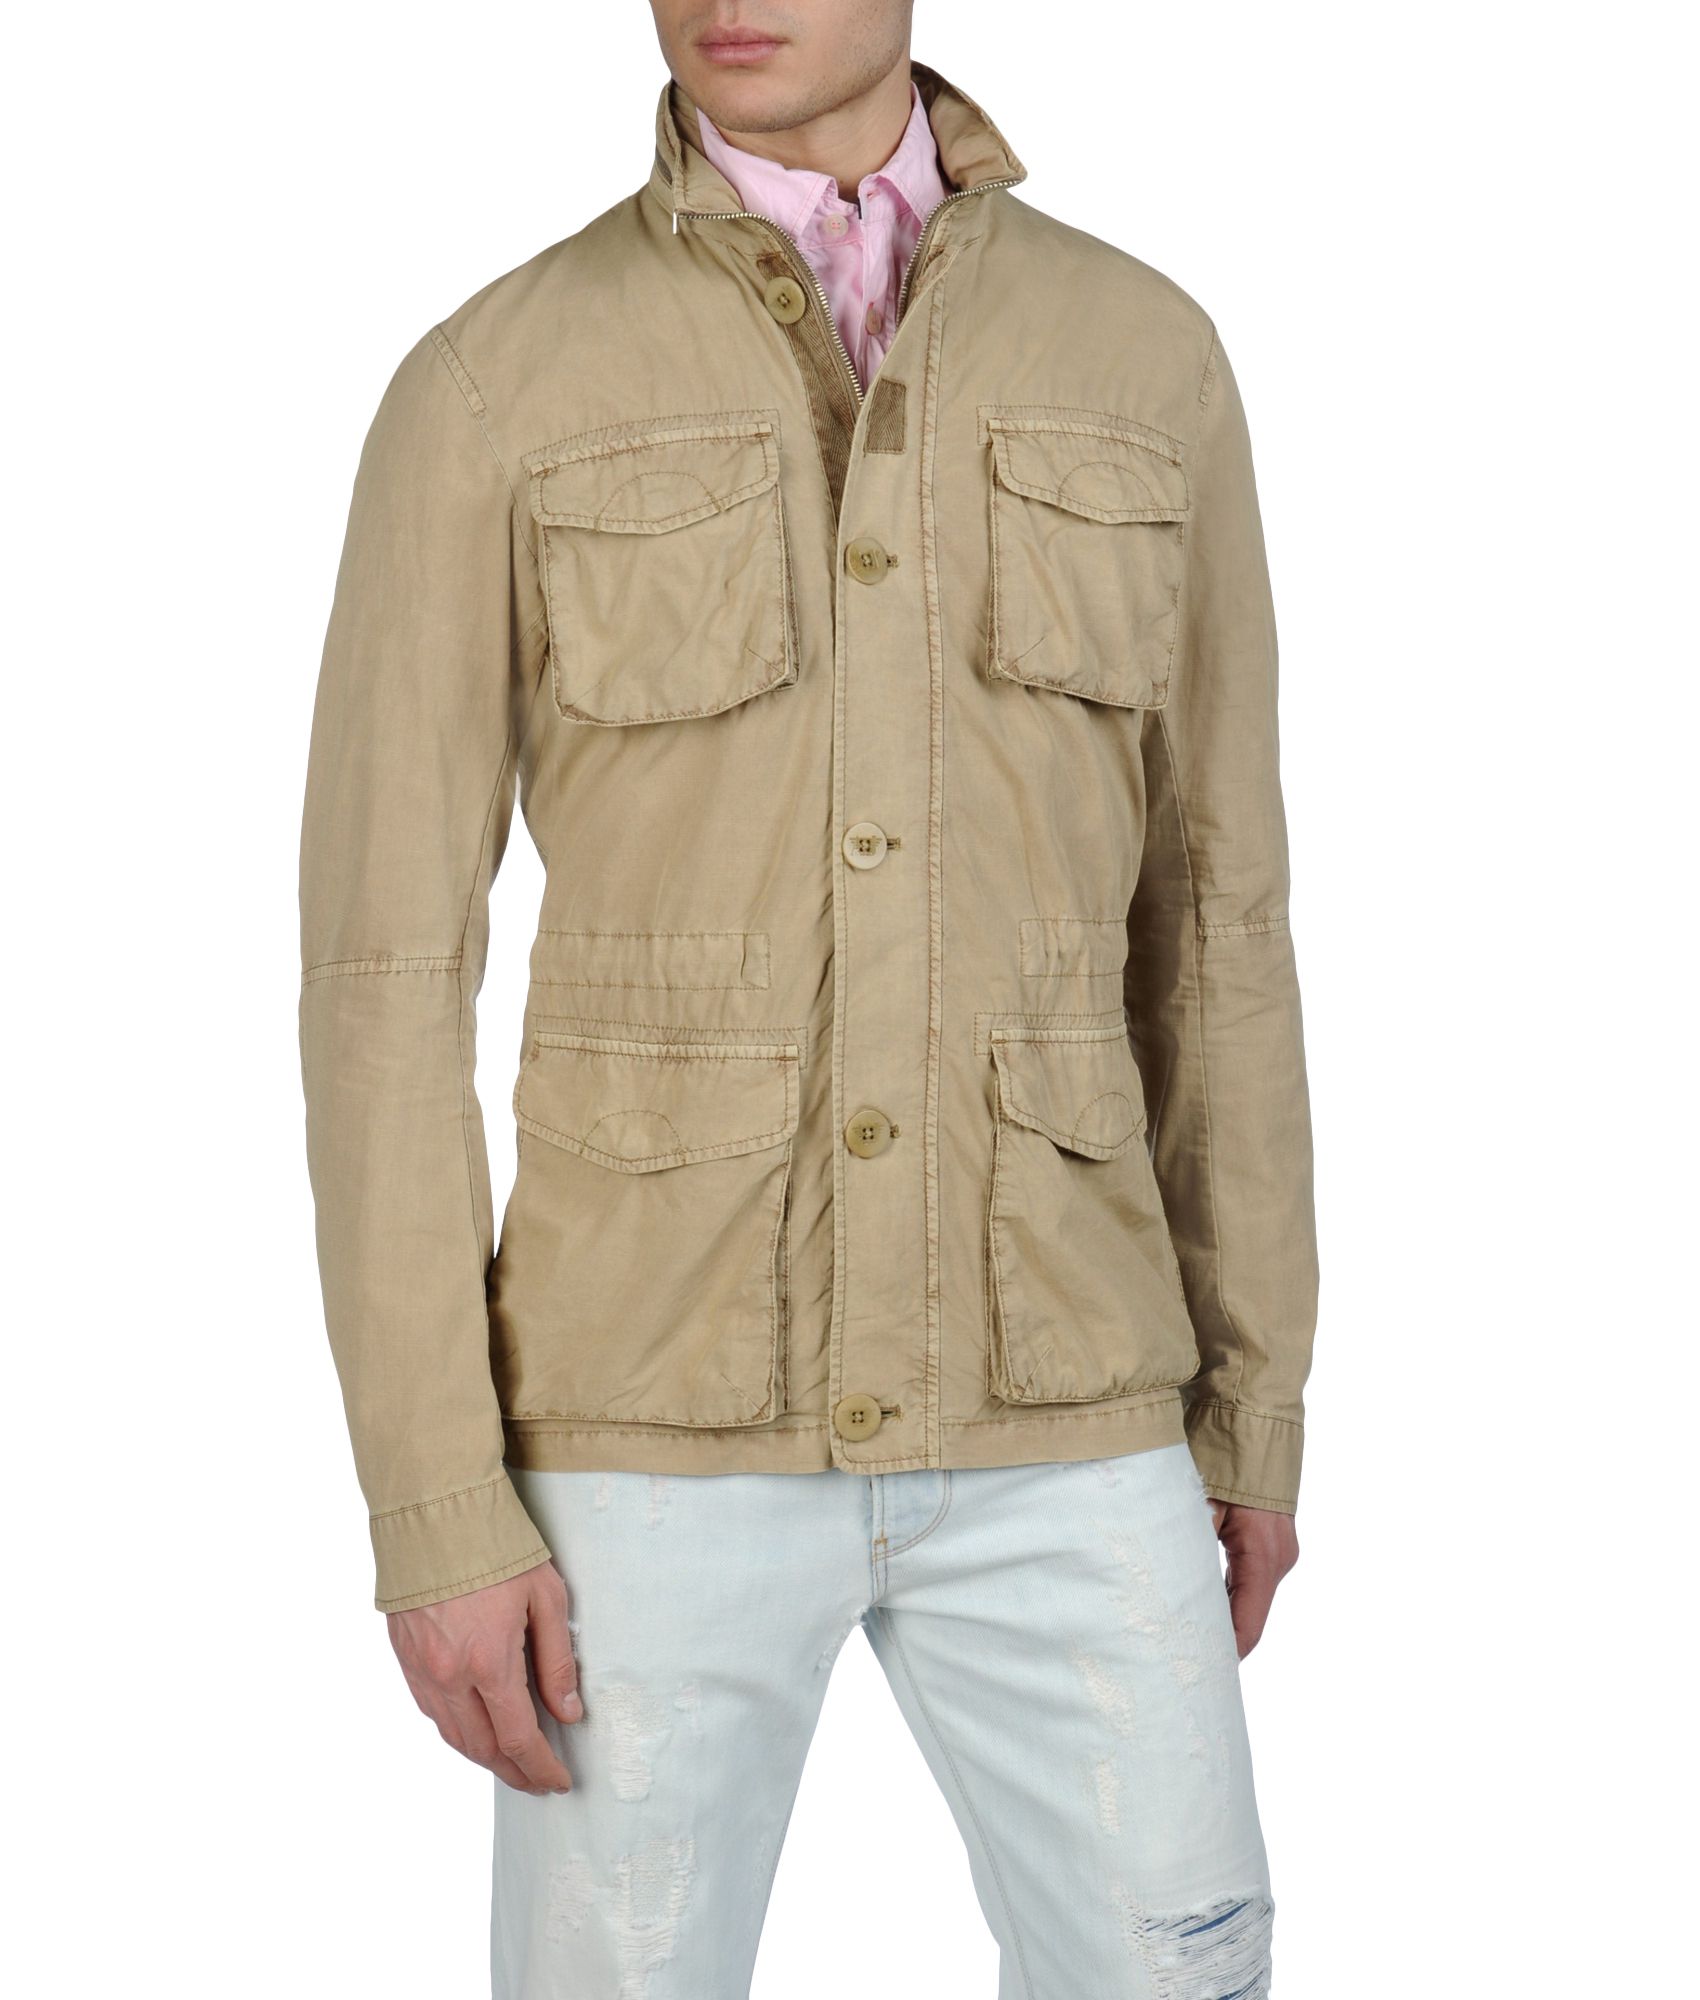 Lyst - Armani Jeans Safari Jacket in Cotton Linen in Natural for Men